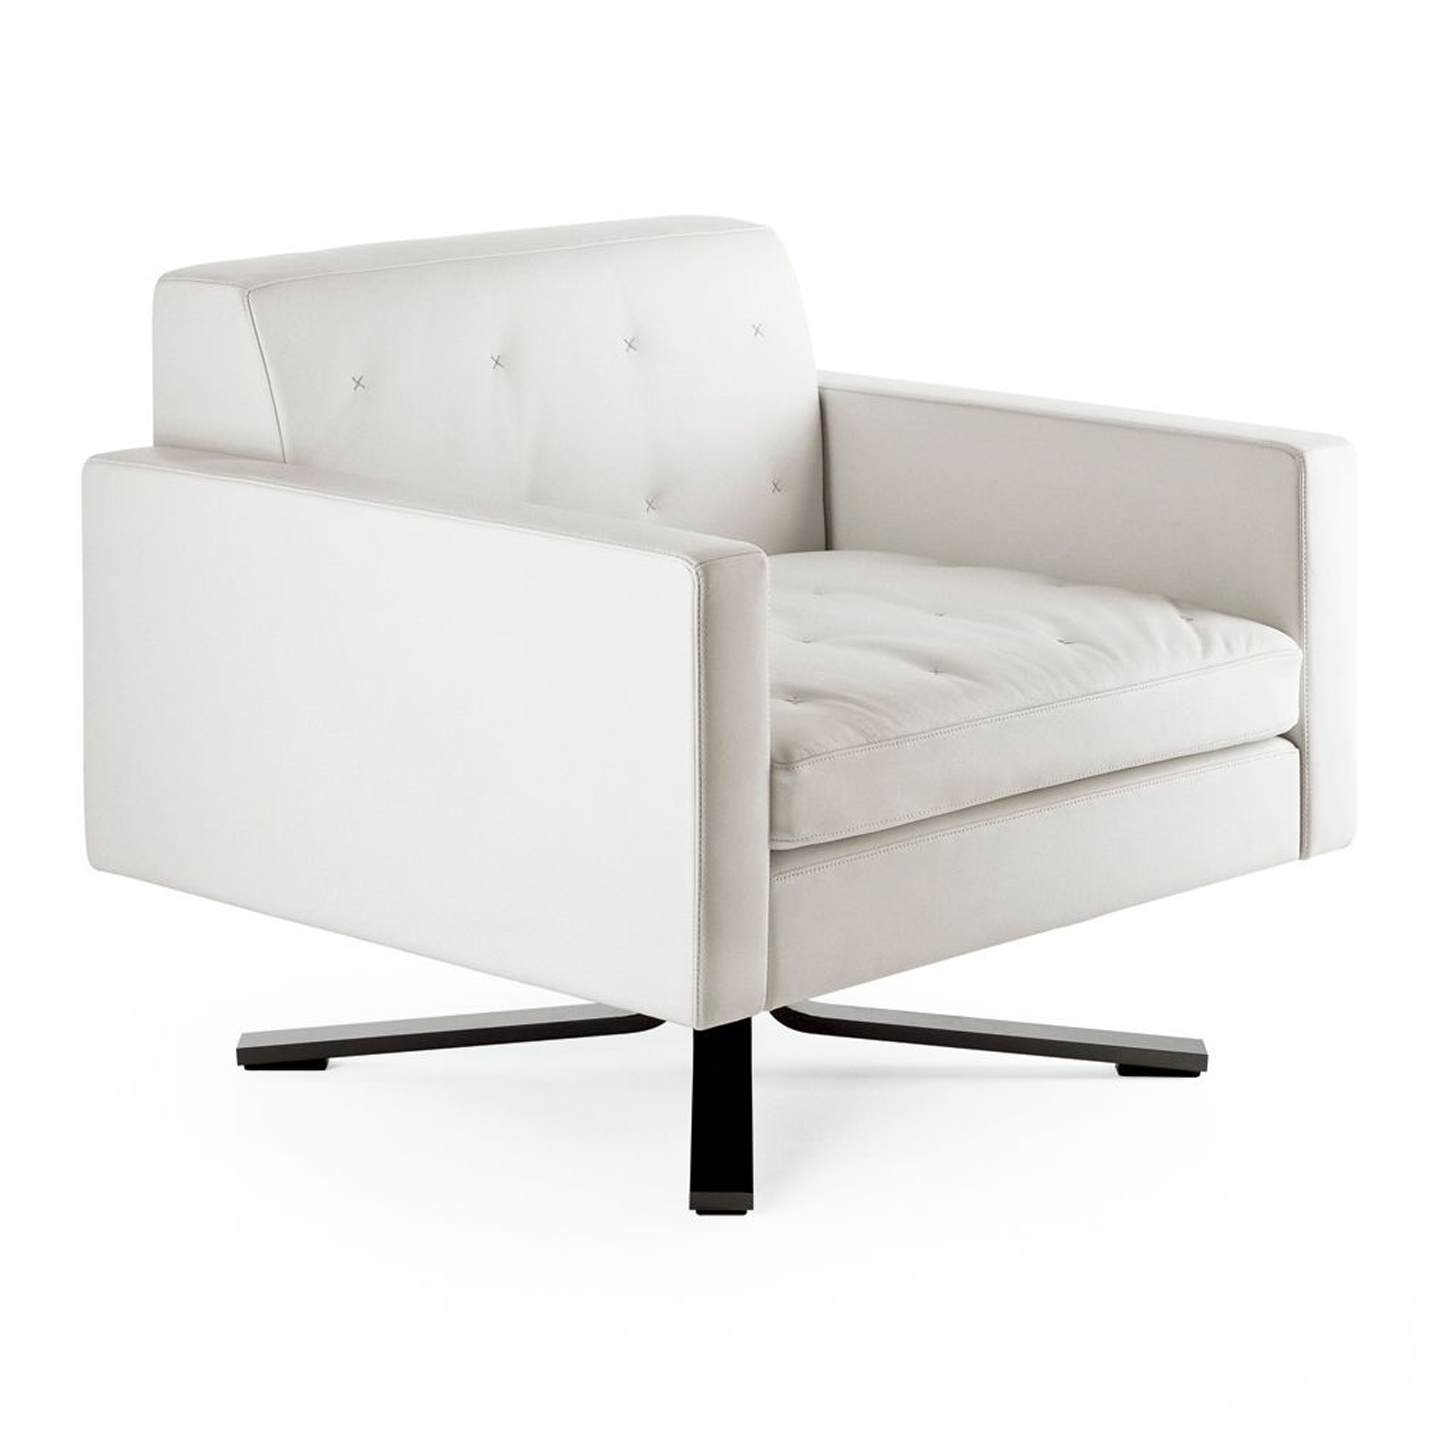 Haworth Kennedee lounge sofa in white leather with black metal legs angular view